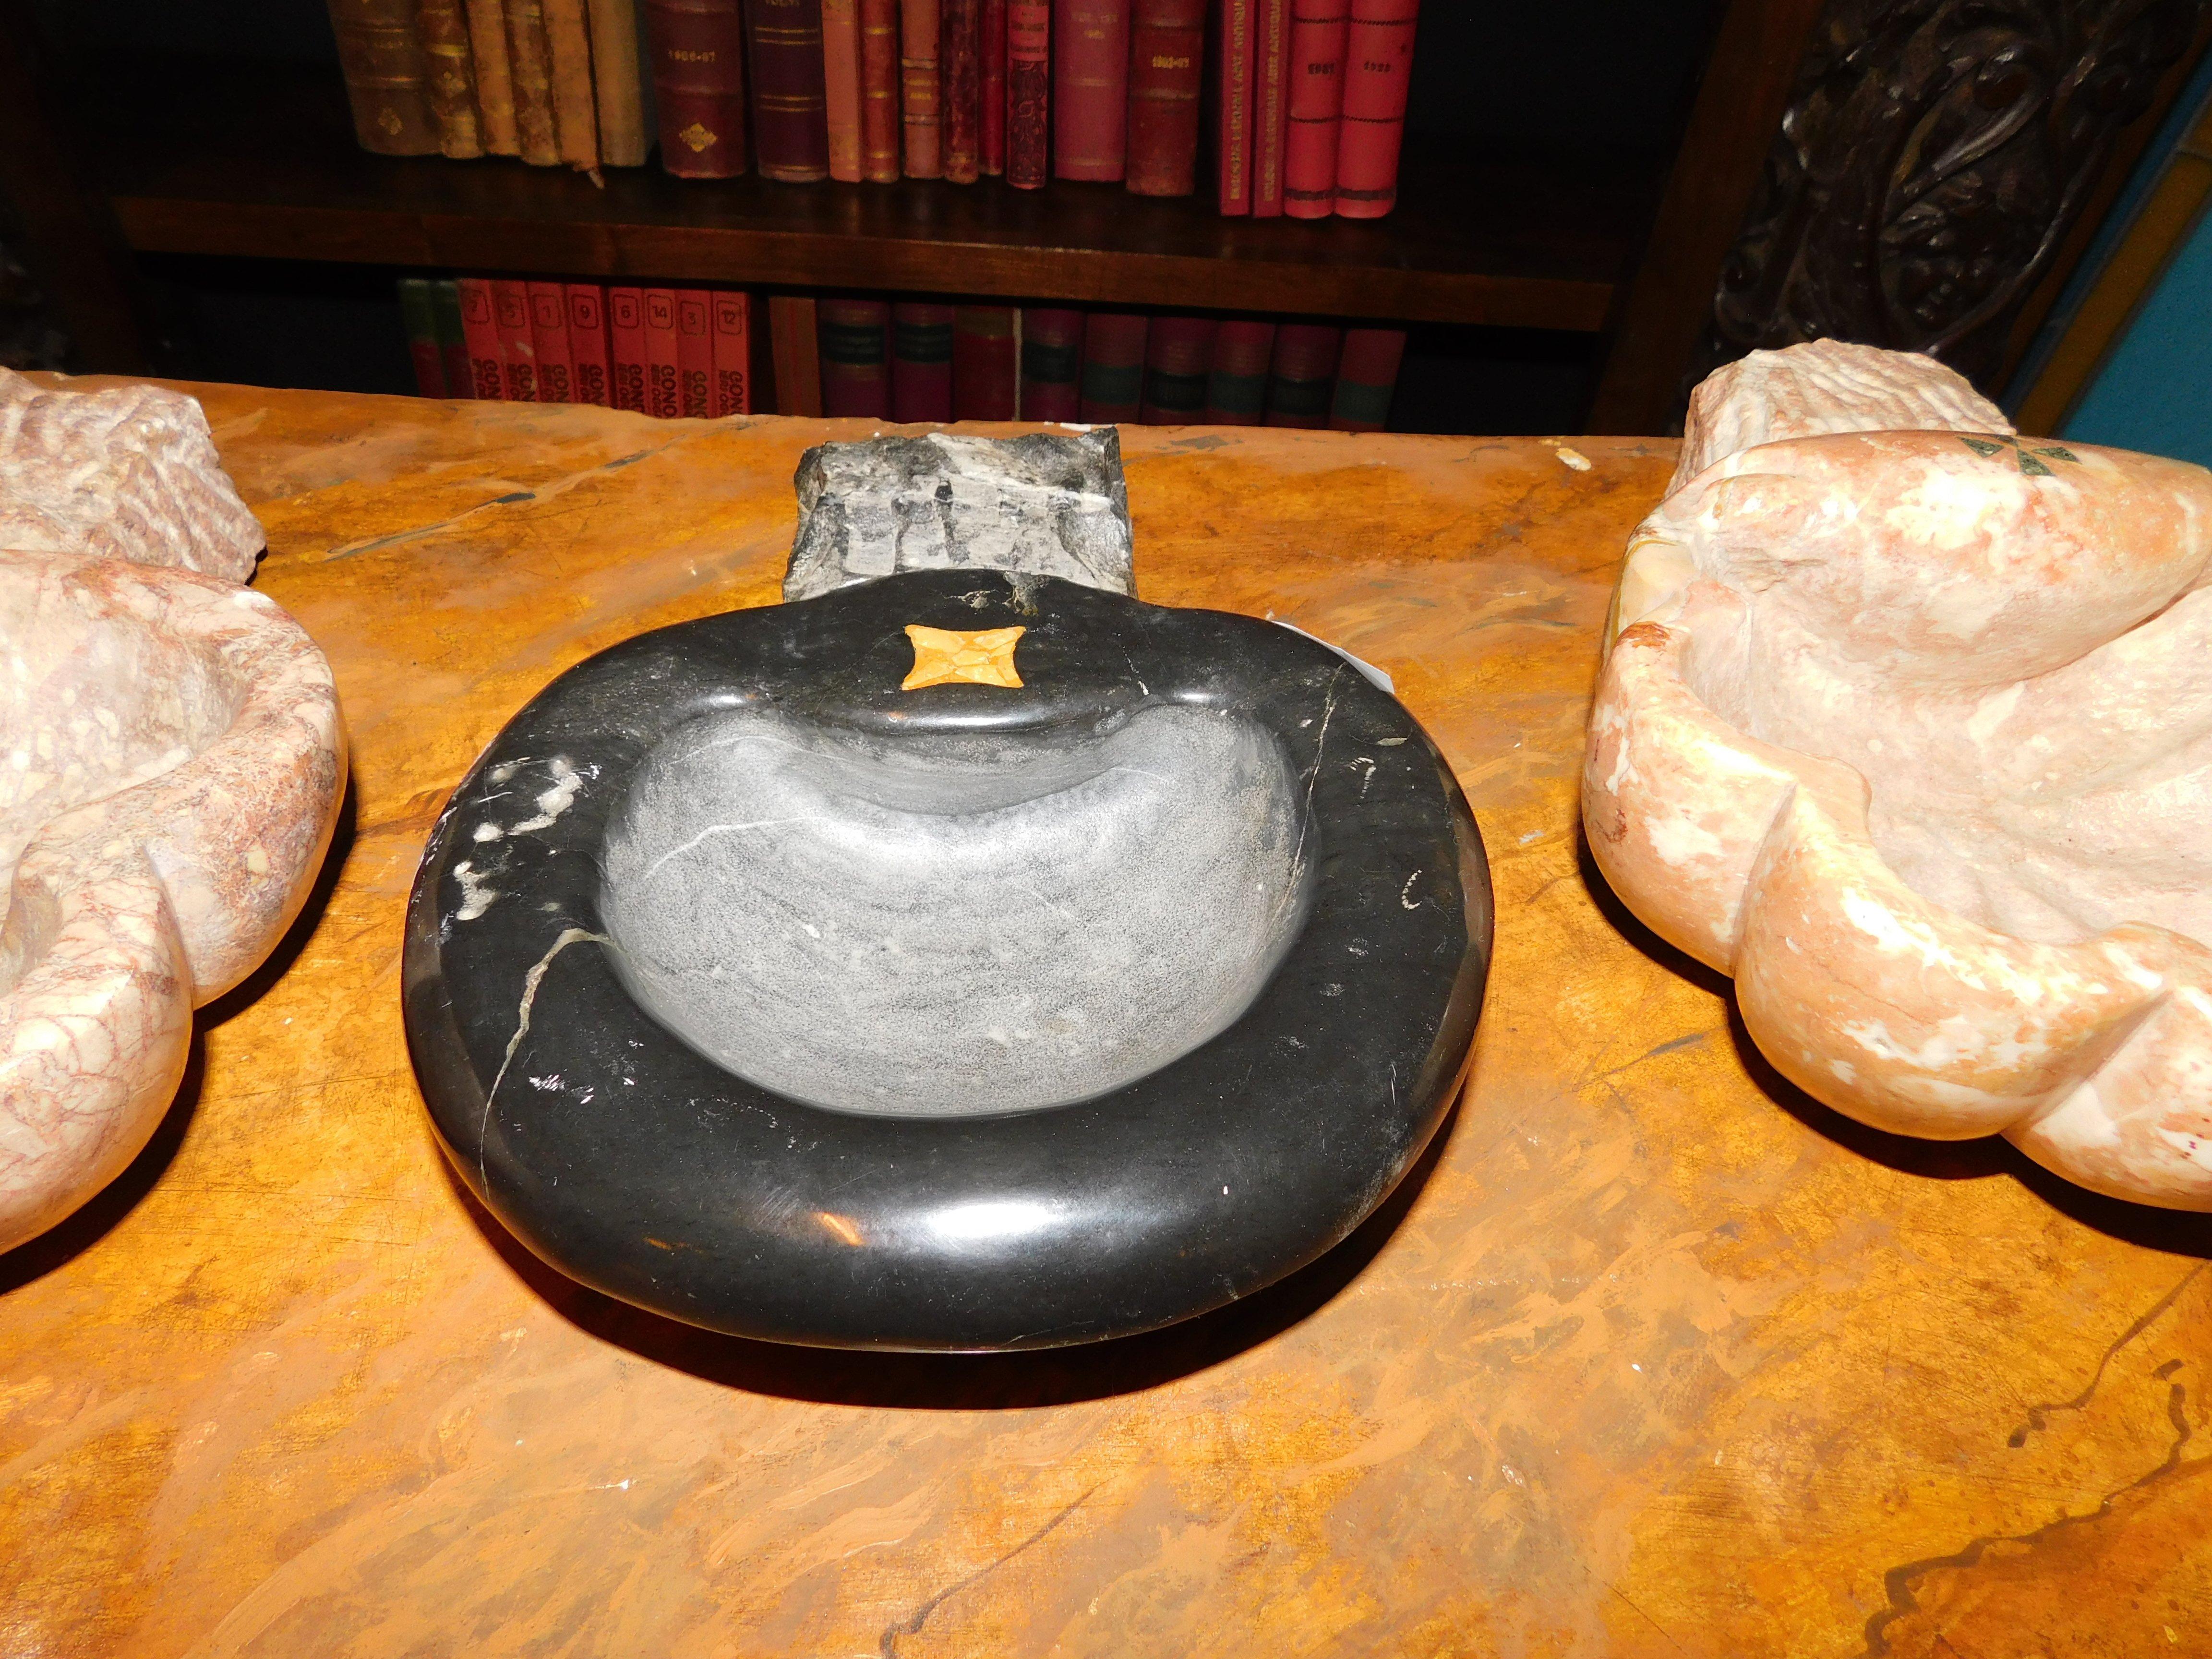 Ancient stoup in black marble with yellow inlay, in the shape of a small basin, built in Italy in the 18th century for a village church, usable as a small tub or sink, both indoors and outdoors, graceful ancient and historical relic of fine marbles,